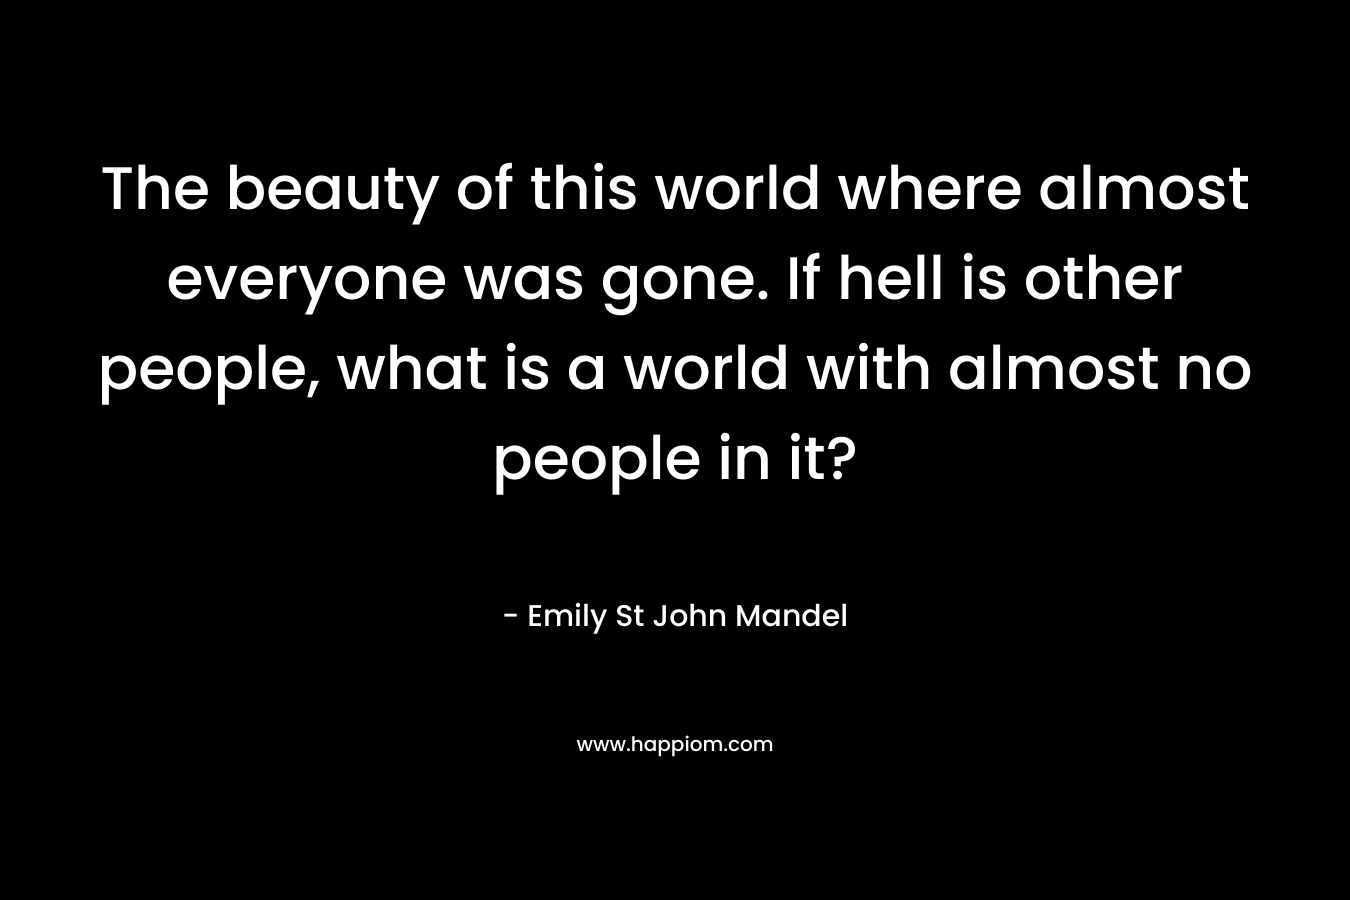 The beauty of this world where almost everyone was gone. If hell is other people, what is a world with almost no people in it?